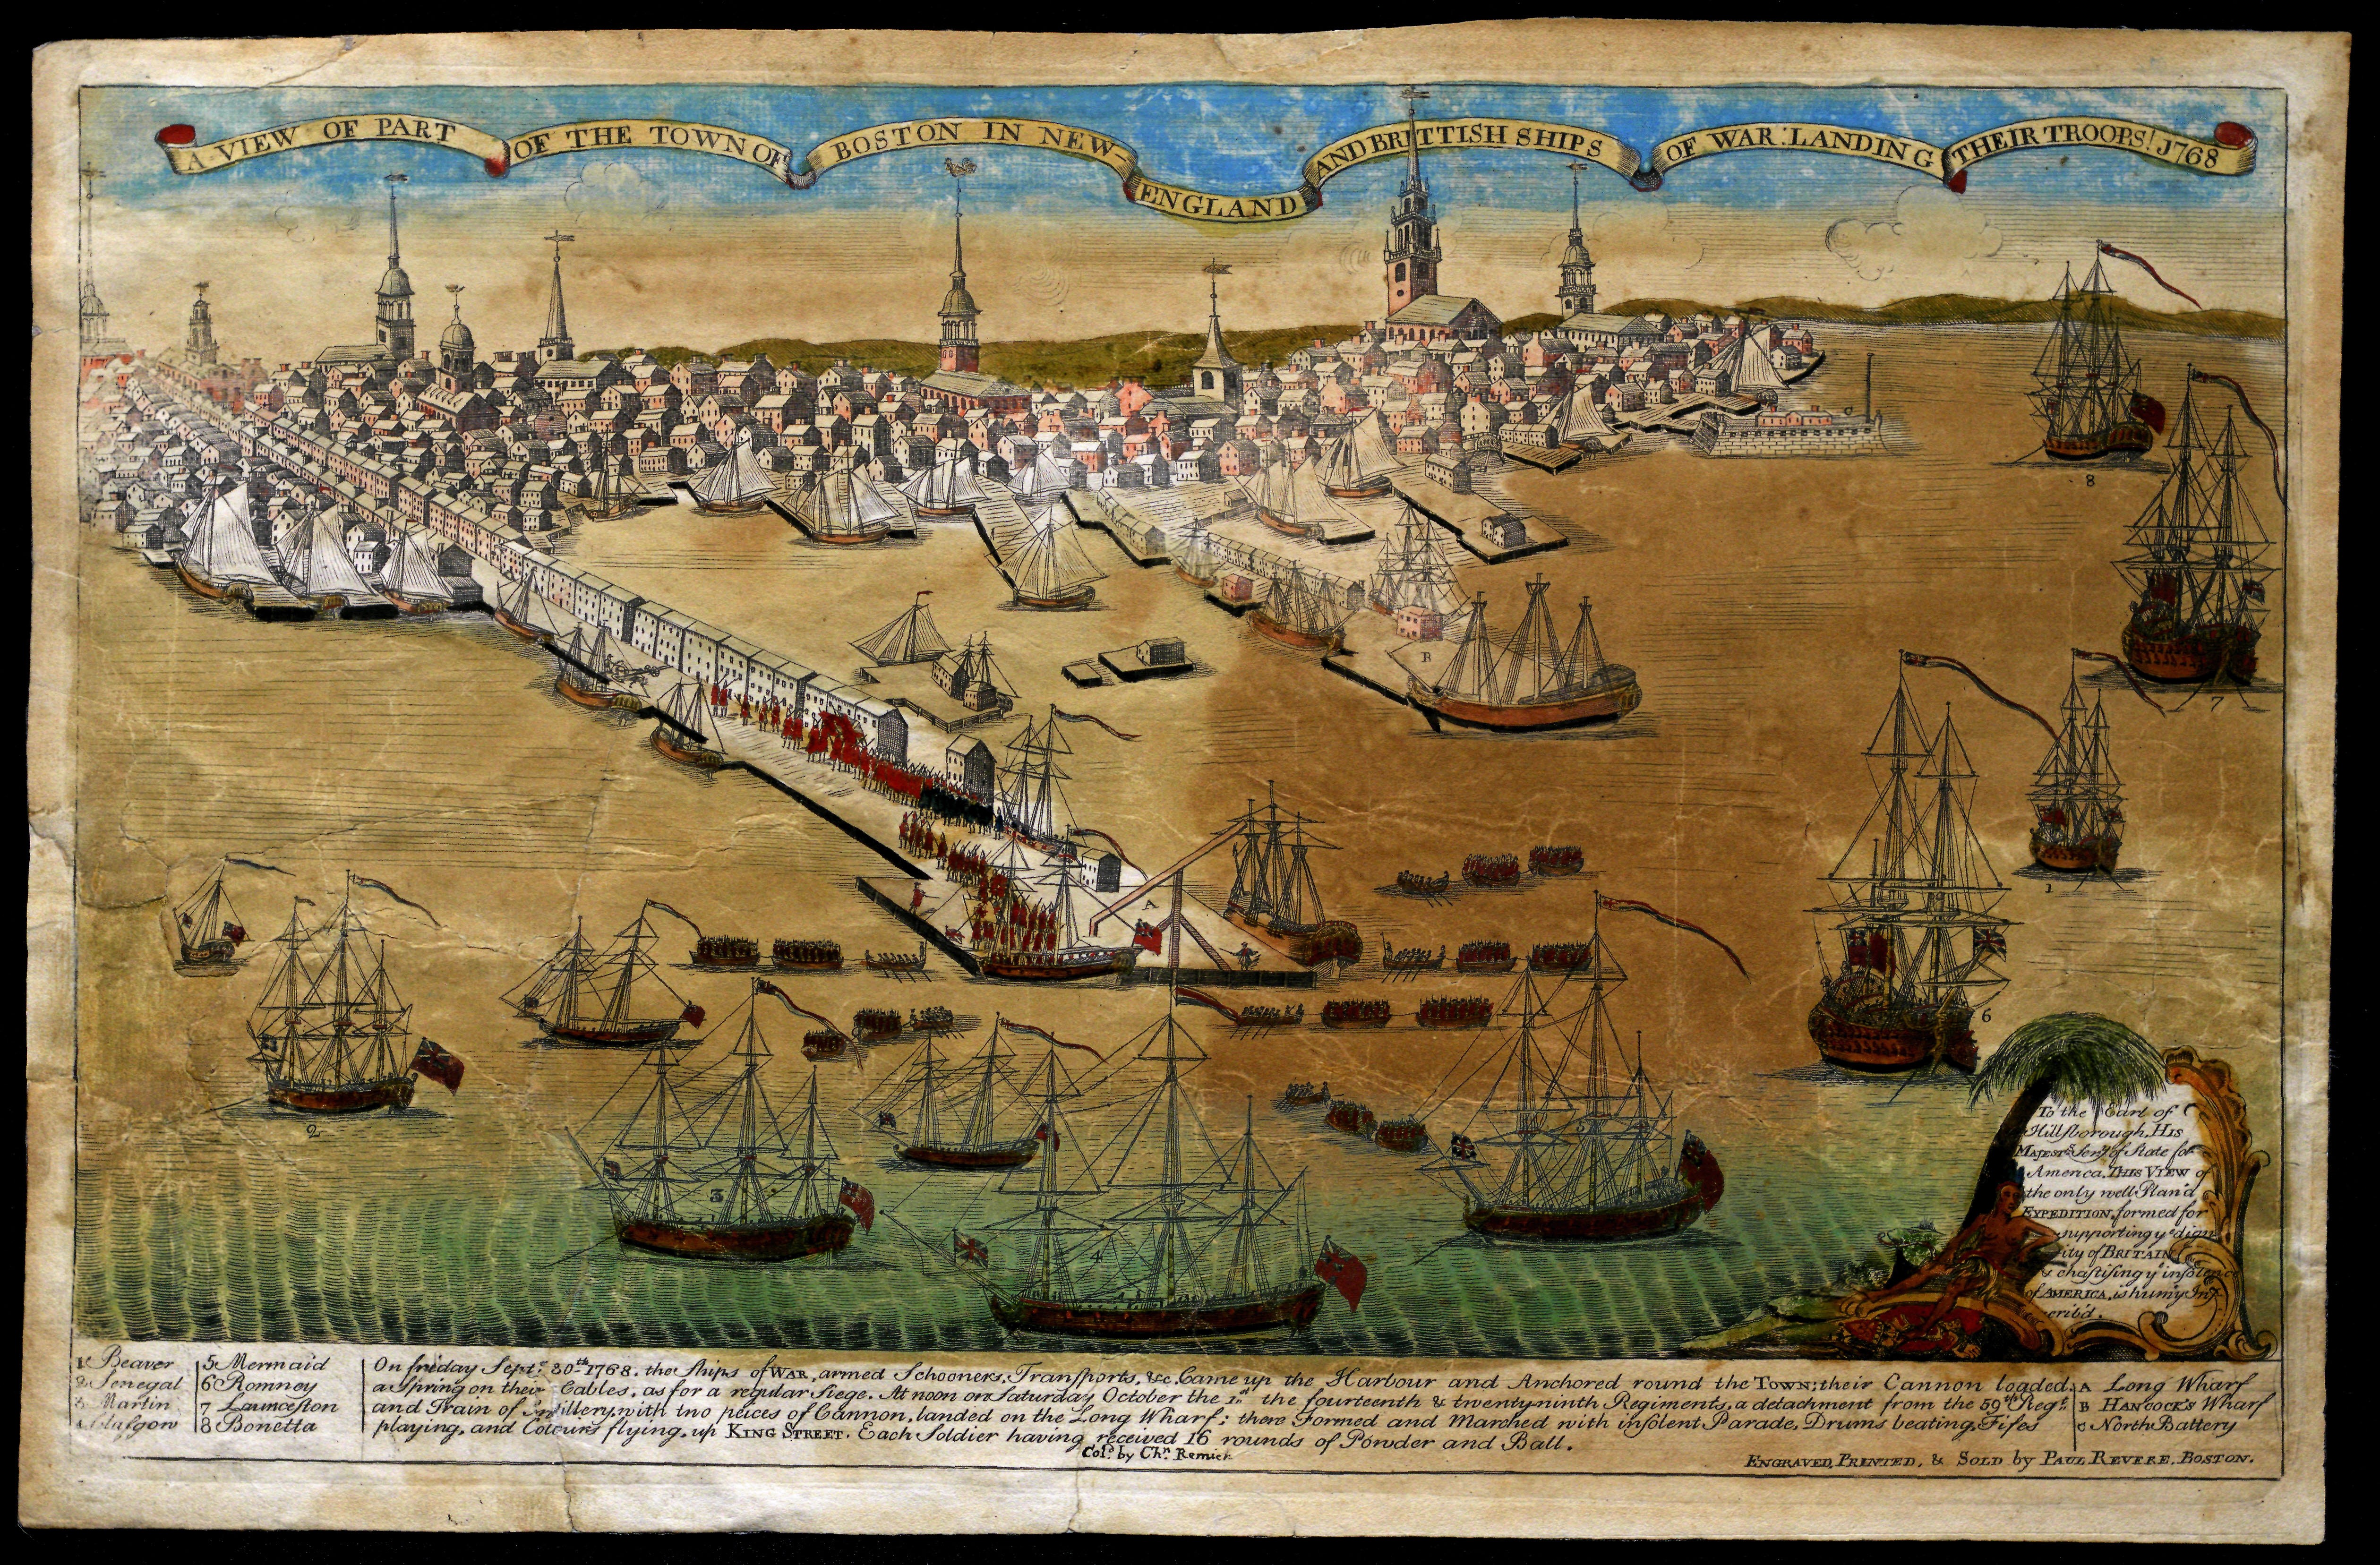 A view of part of the town of Boston in New-England and Brittish Ships of War landing their troops, 1768 by Paul Revere (Gilder Lehrman Institute, GLC02873)